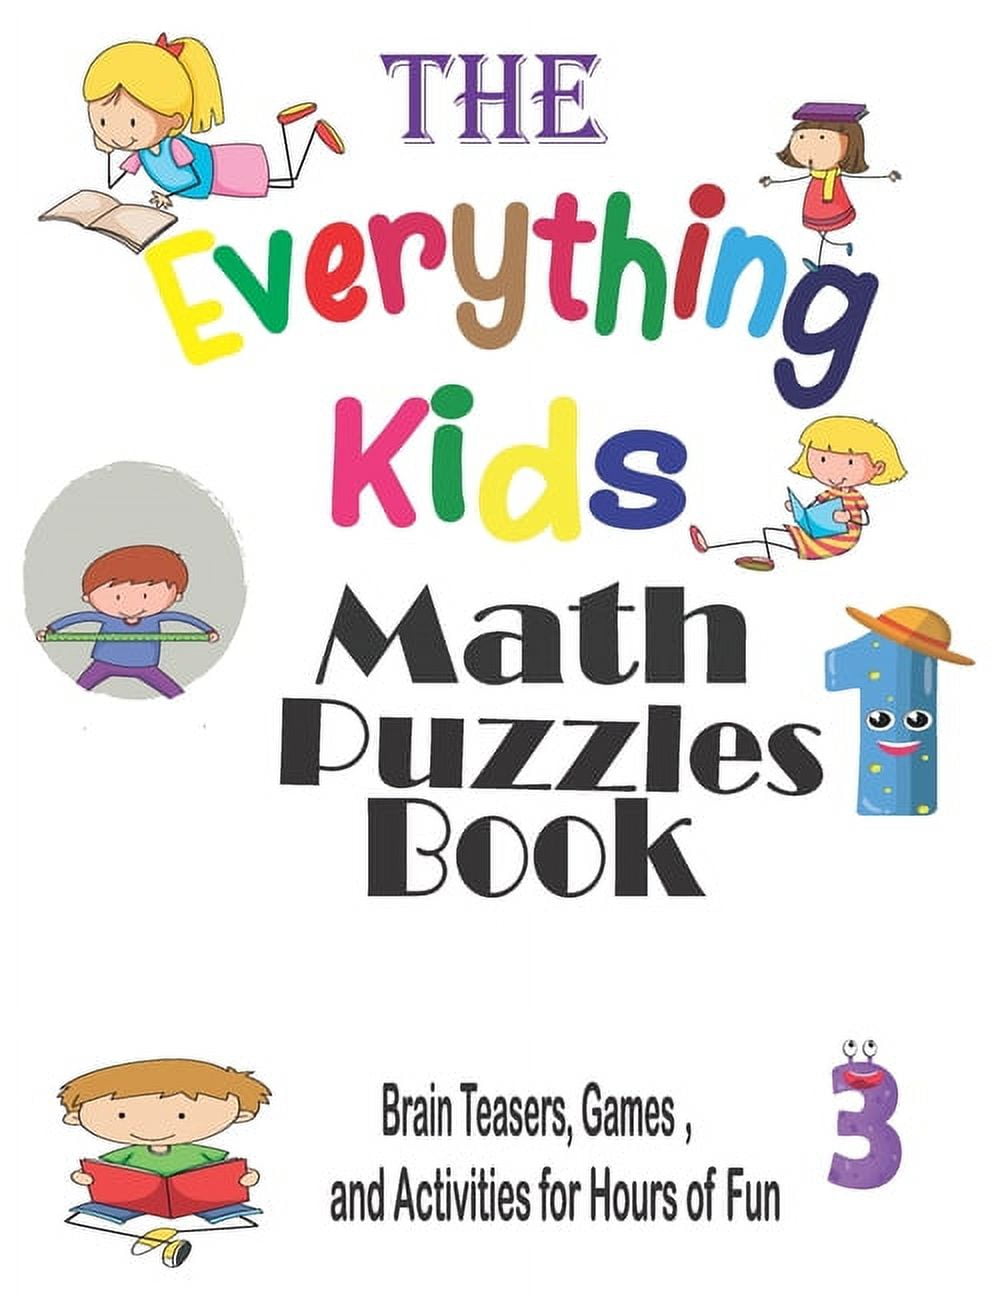 My First Grade Math Book: A Fun Educational Brain Game Book for Children  with Answer Sheet/Exercises Book for Children Ages 6-8/ A Wonderful Pre  (Paperback)